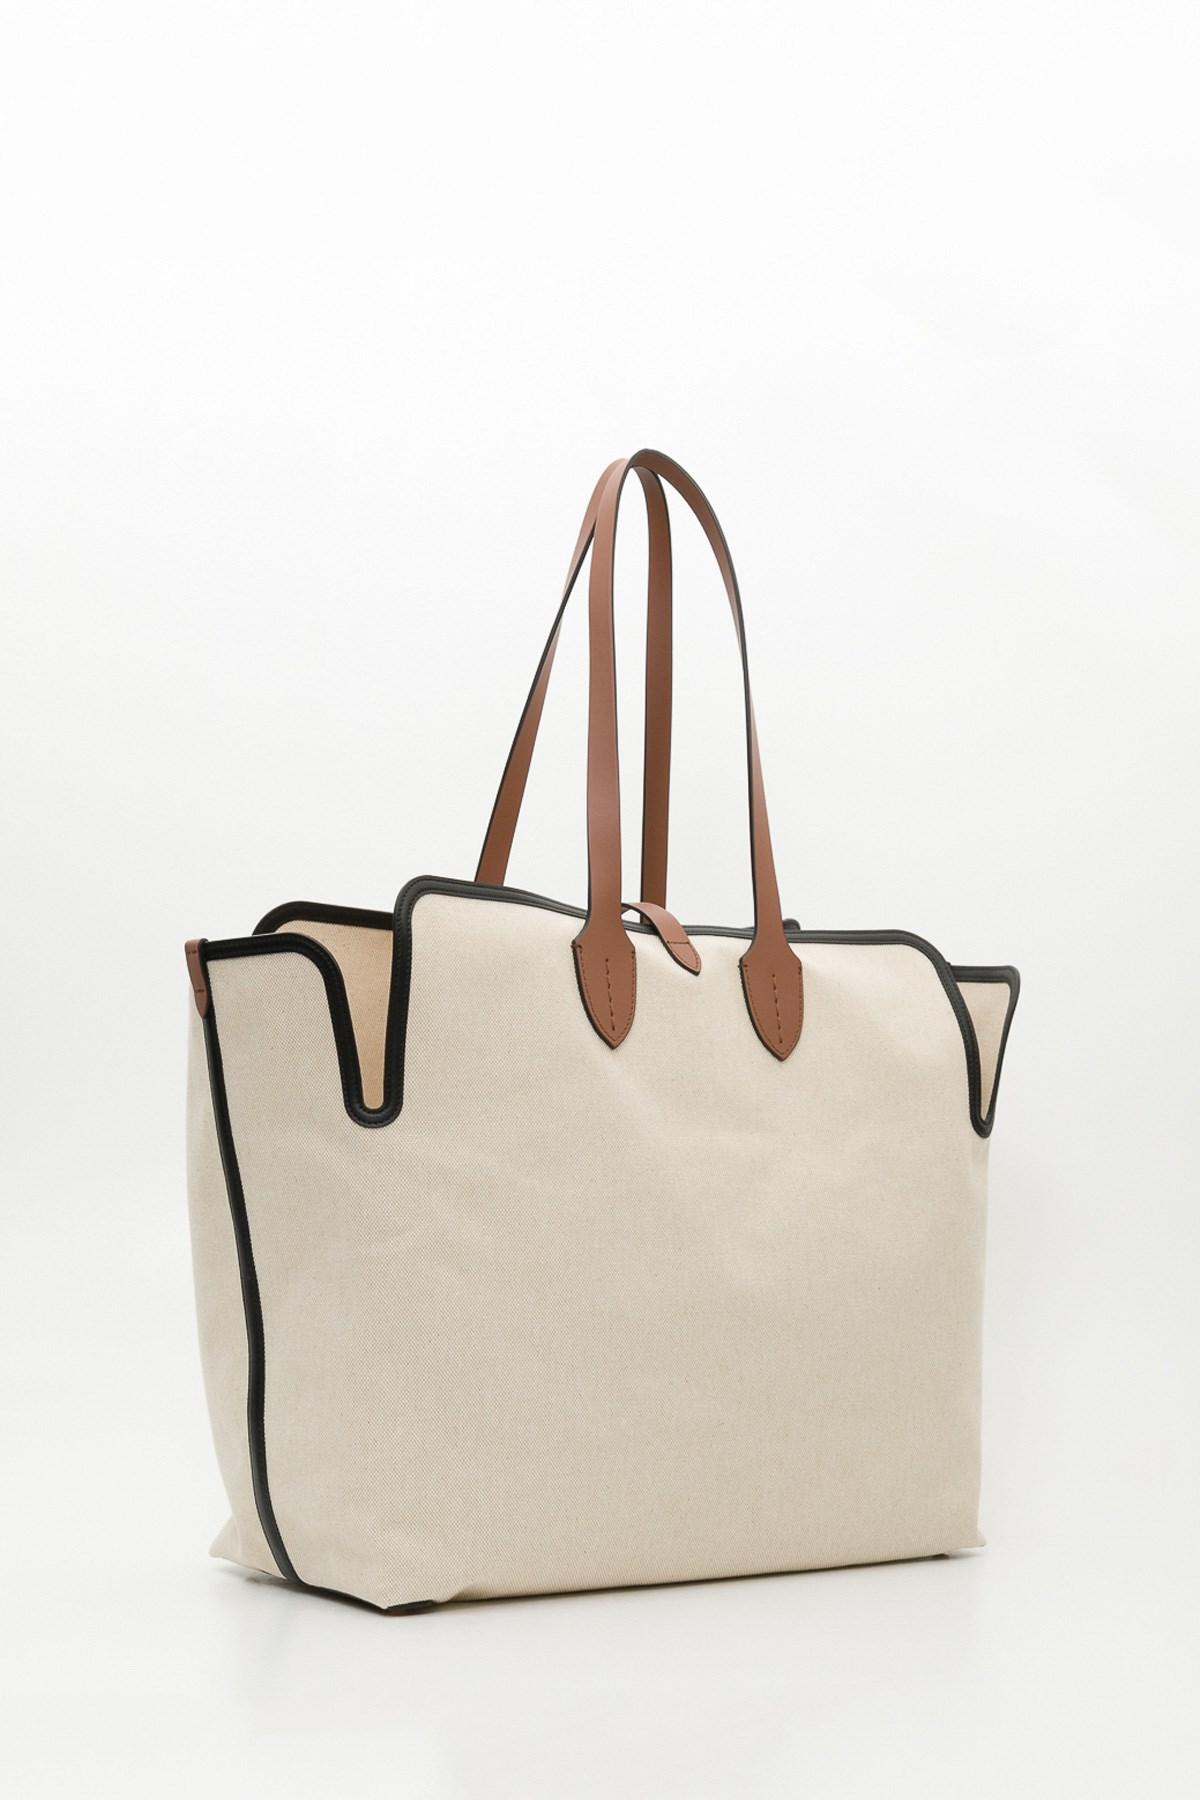 Burberry Canvas Logo Tote in Natural - Lyst